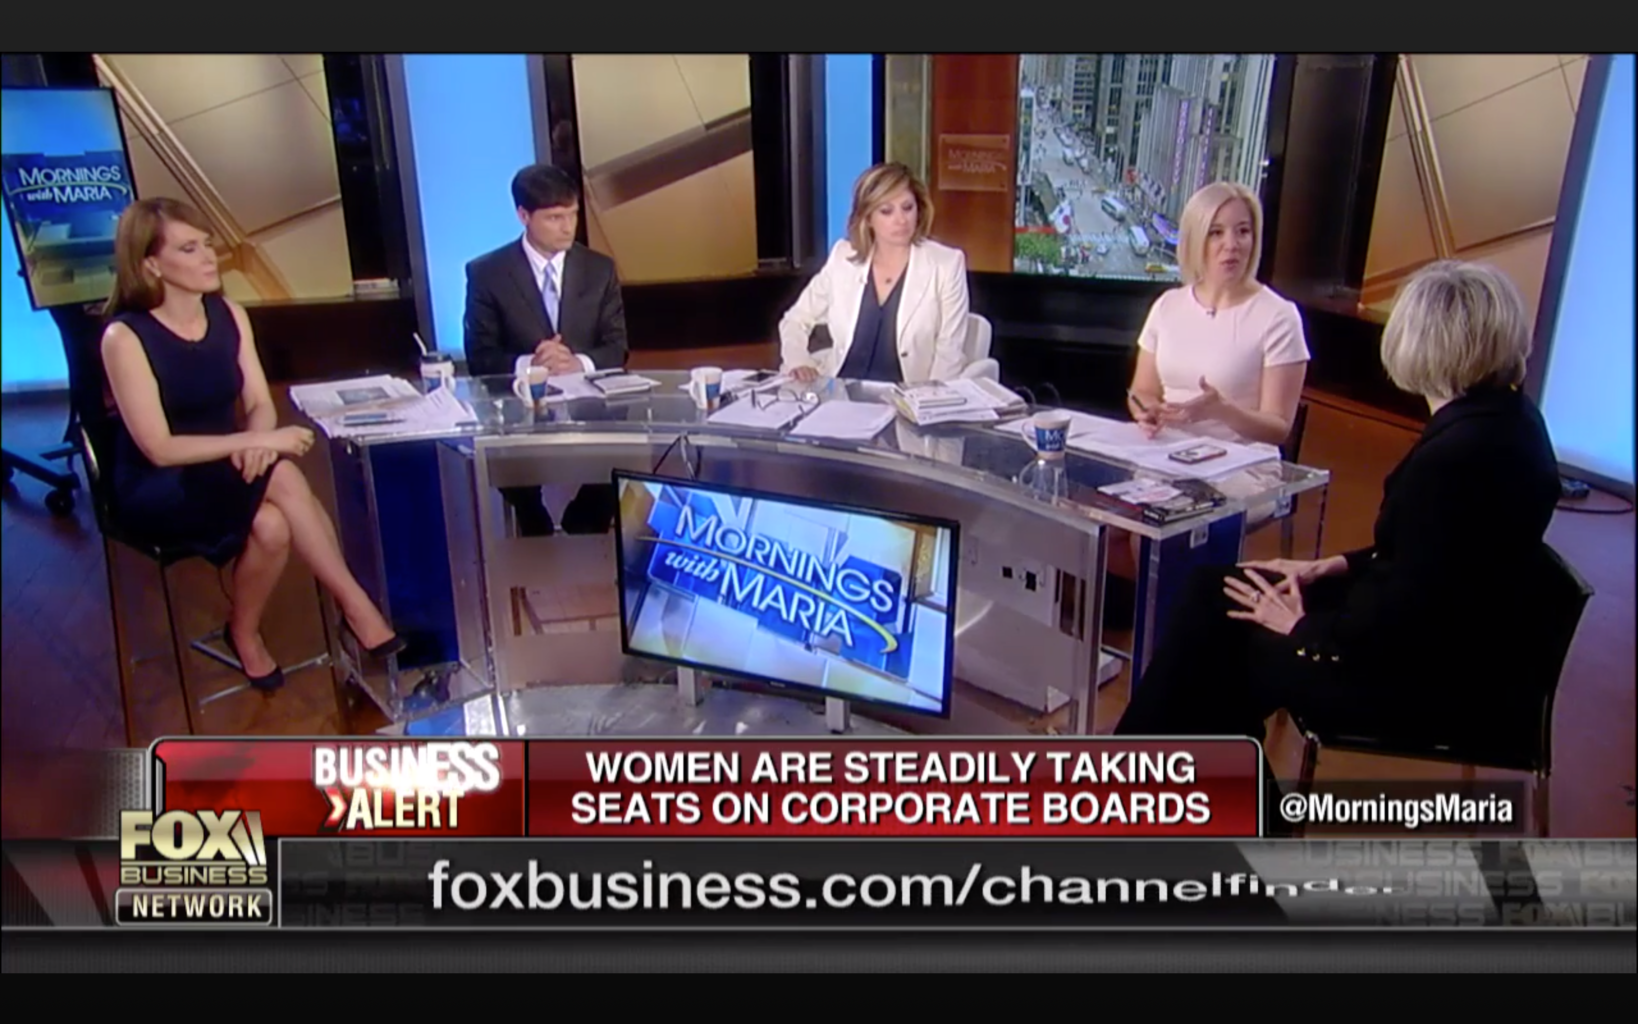 It was great discussing the growing trend of getting women on corporate boards on Fox Business News!